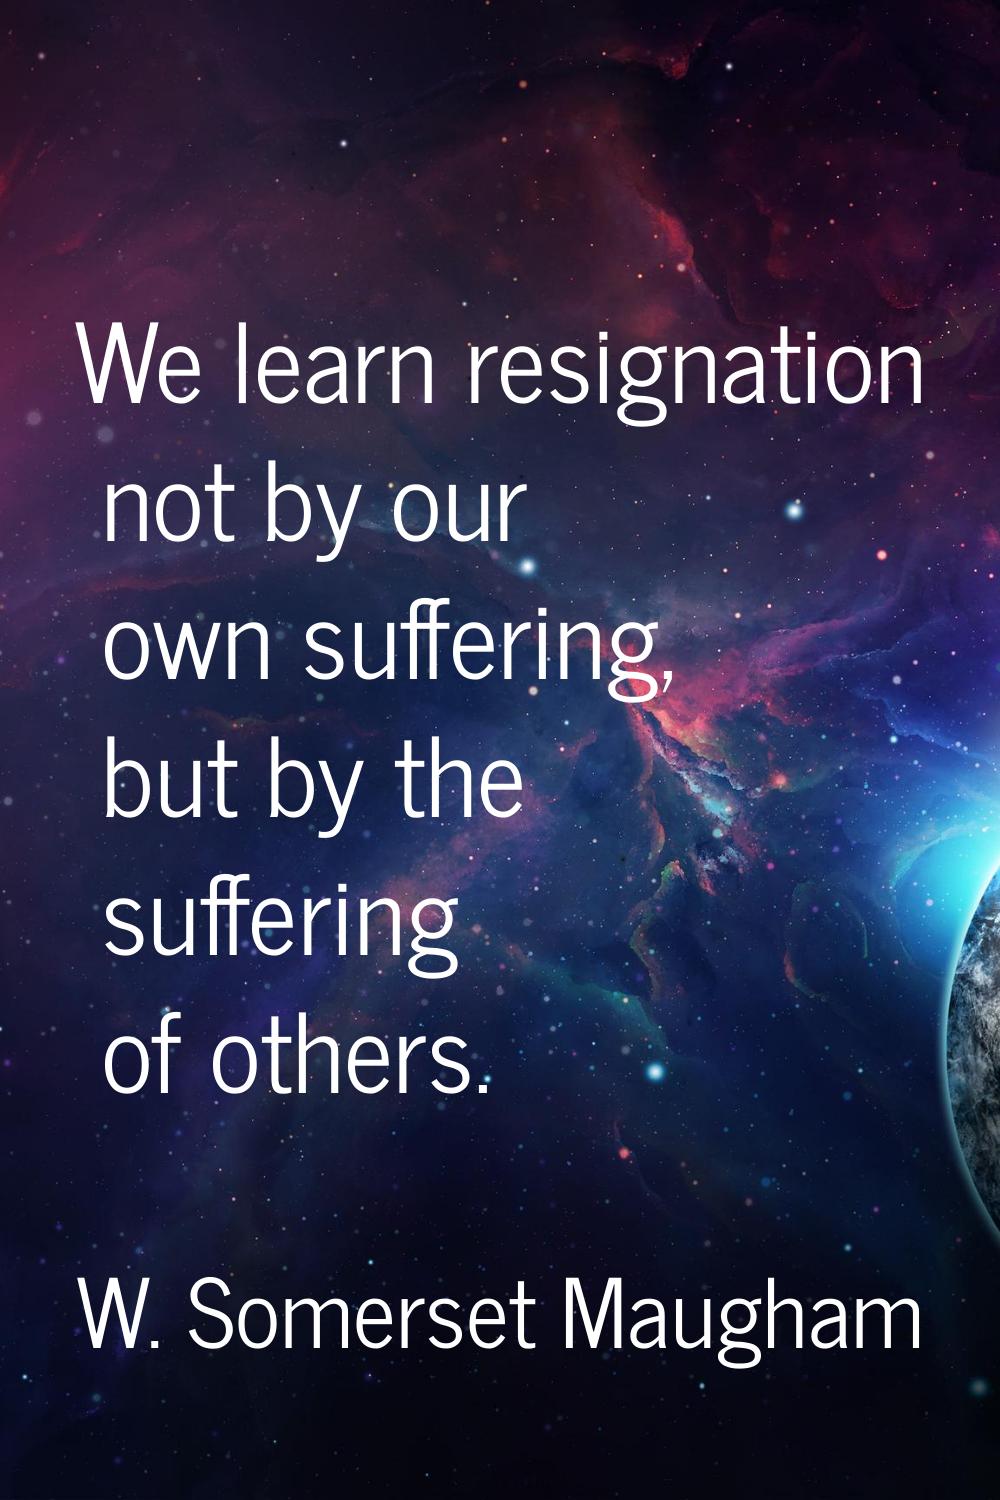 We learn resignation not by our own suffering, but by the suffering of others.